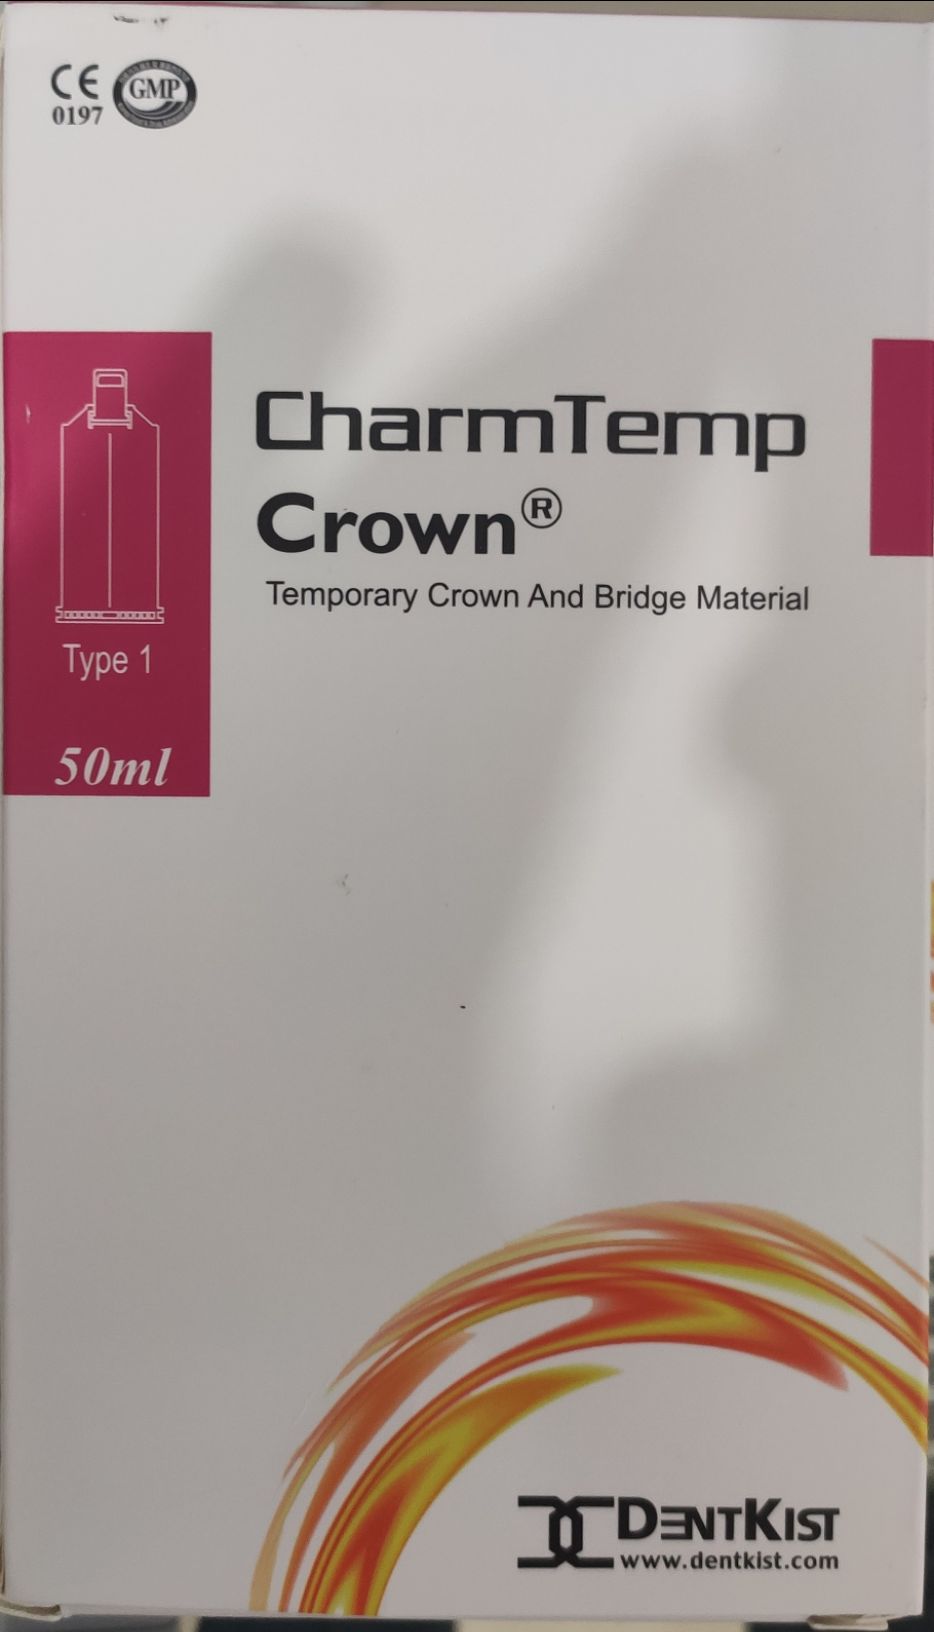 Temporary crown material